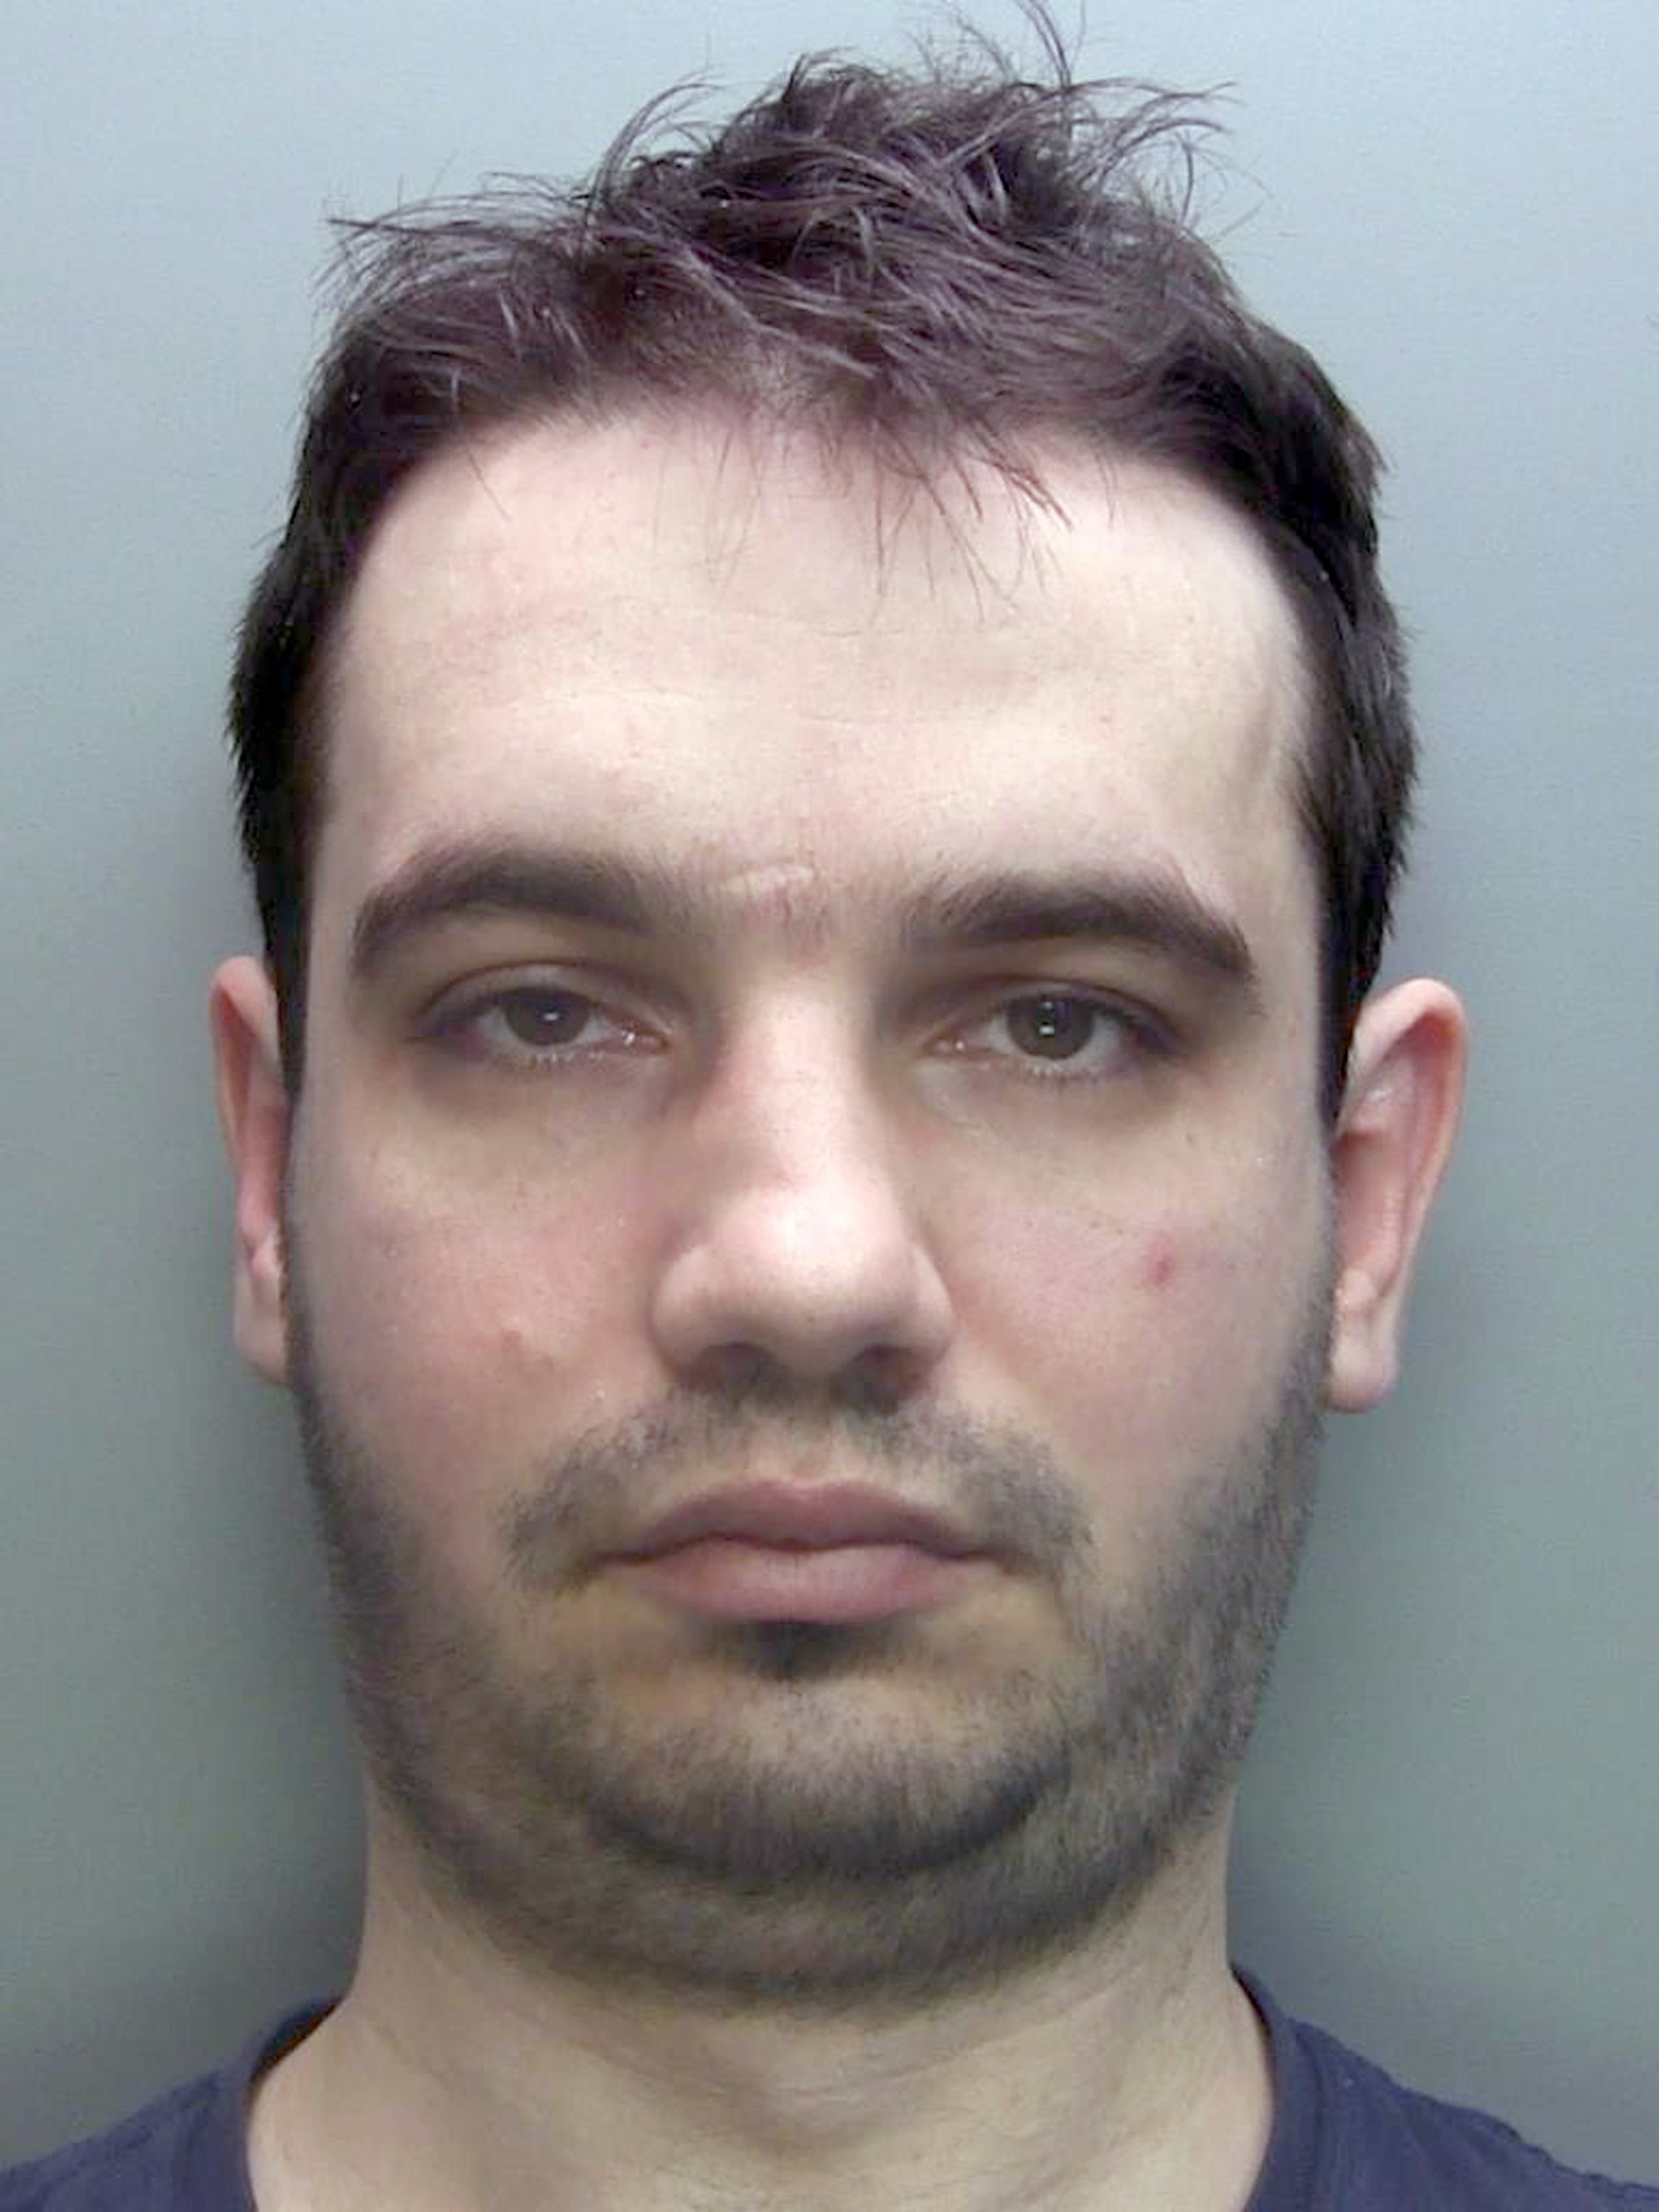 Ion Ciucur, 30, of Gretna, Dumfries and Galloway, Scotland, who received five years and eight months imprisonment at the Old Bailey in London